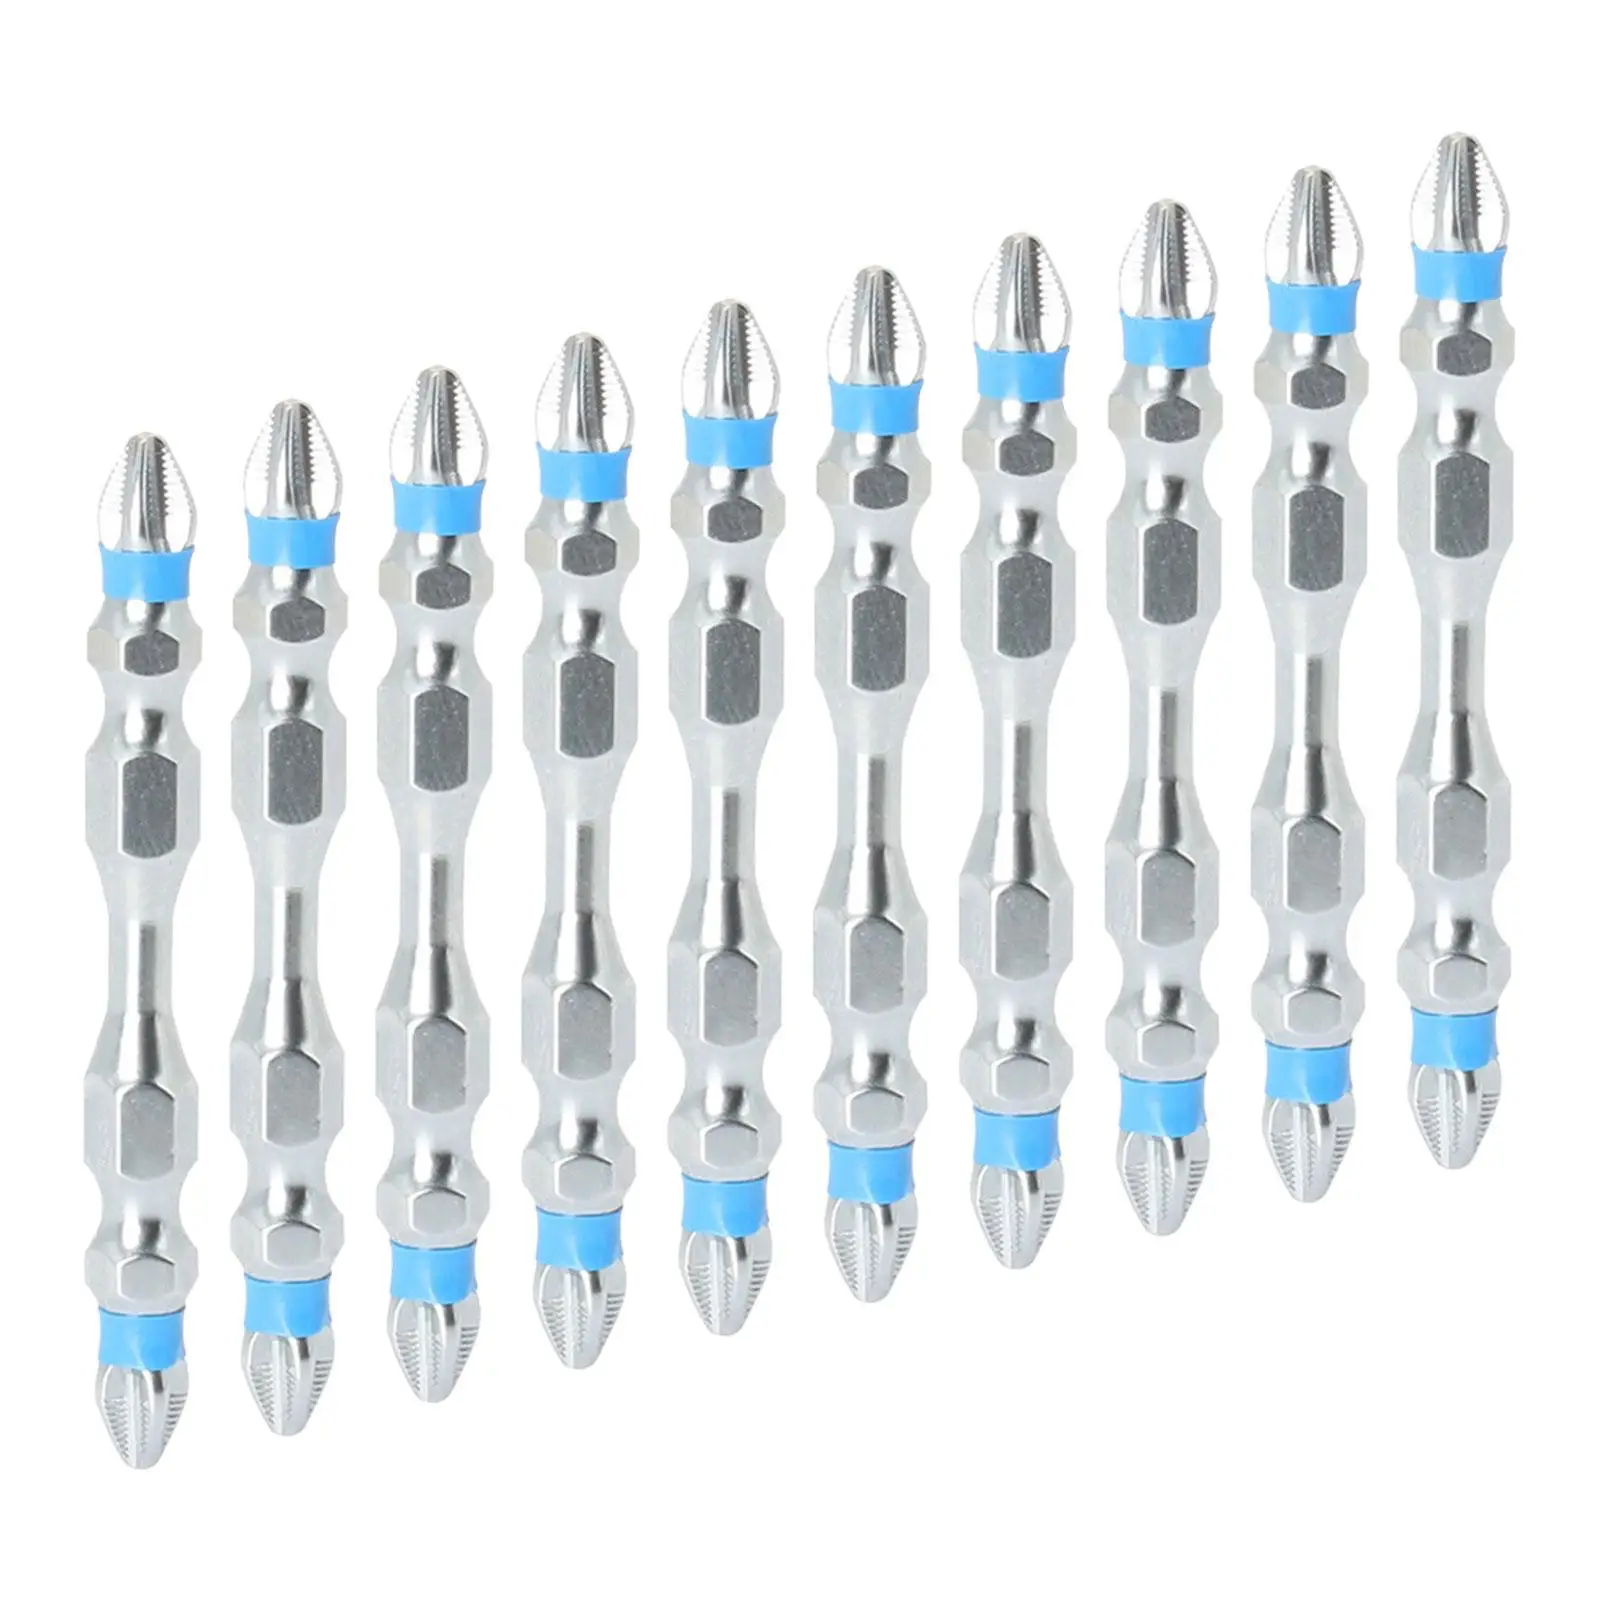 10Pcs Cross Screw Head Hand Tools Electric Screwdriver Bit for Engineering Electrician Woodworking Household Repair Appliances